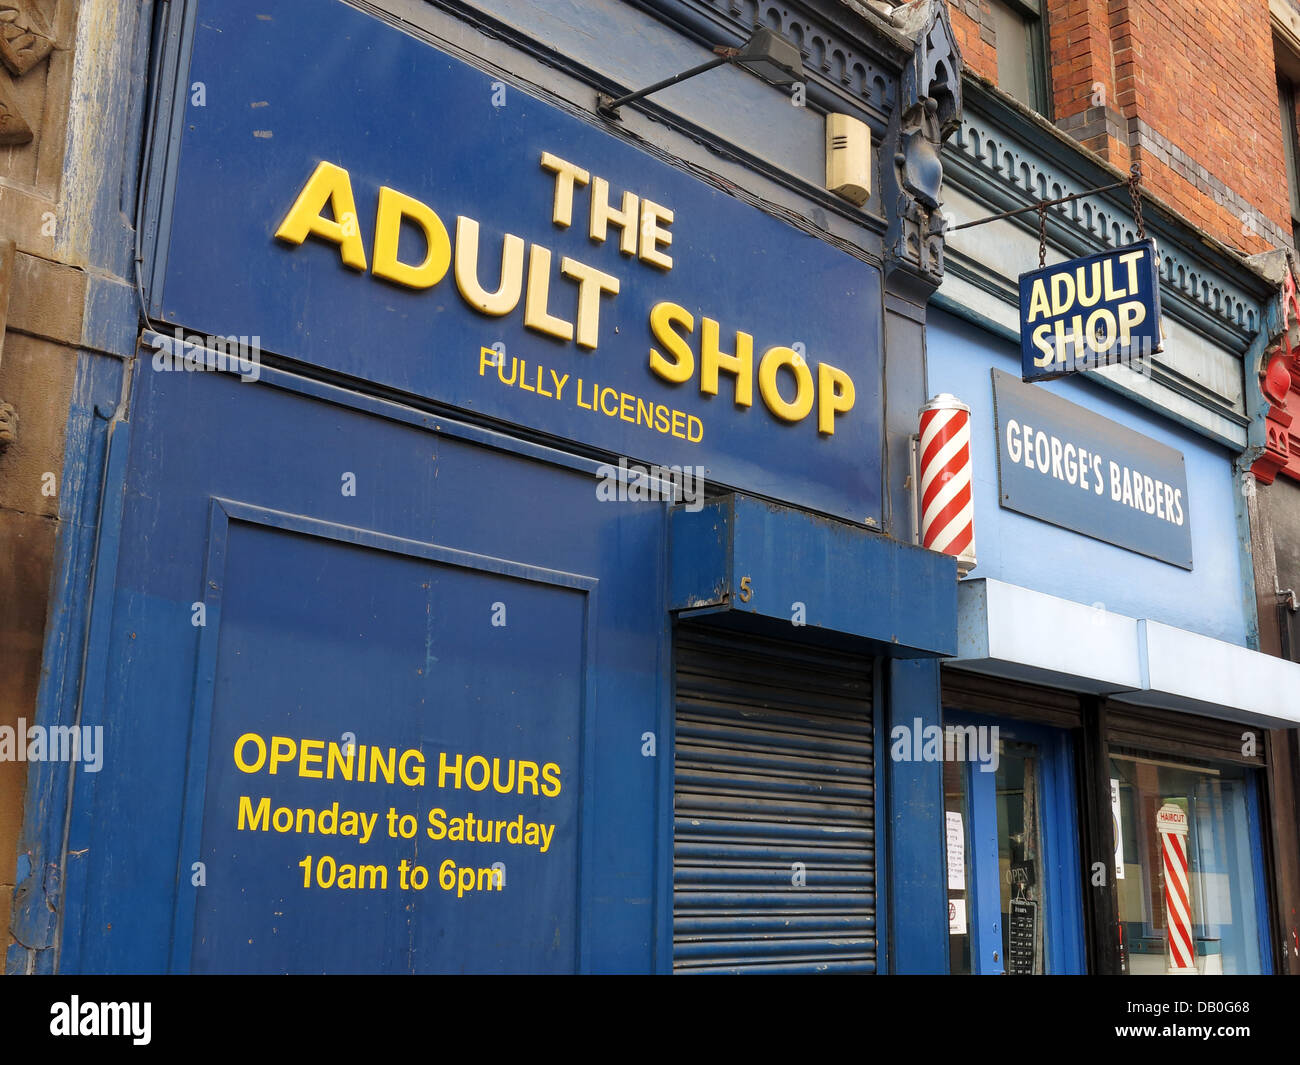 The Adult Shop,Fully Licenced, Sex Shop, NQ, Northern Quarter, Manchester Piccadilly, North West England, UK, M1 Stock Photo